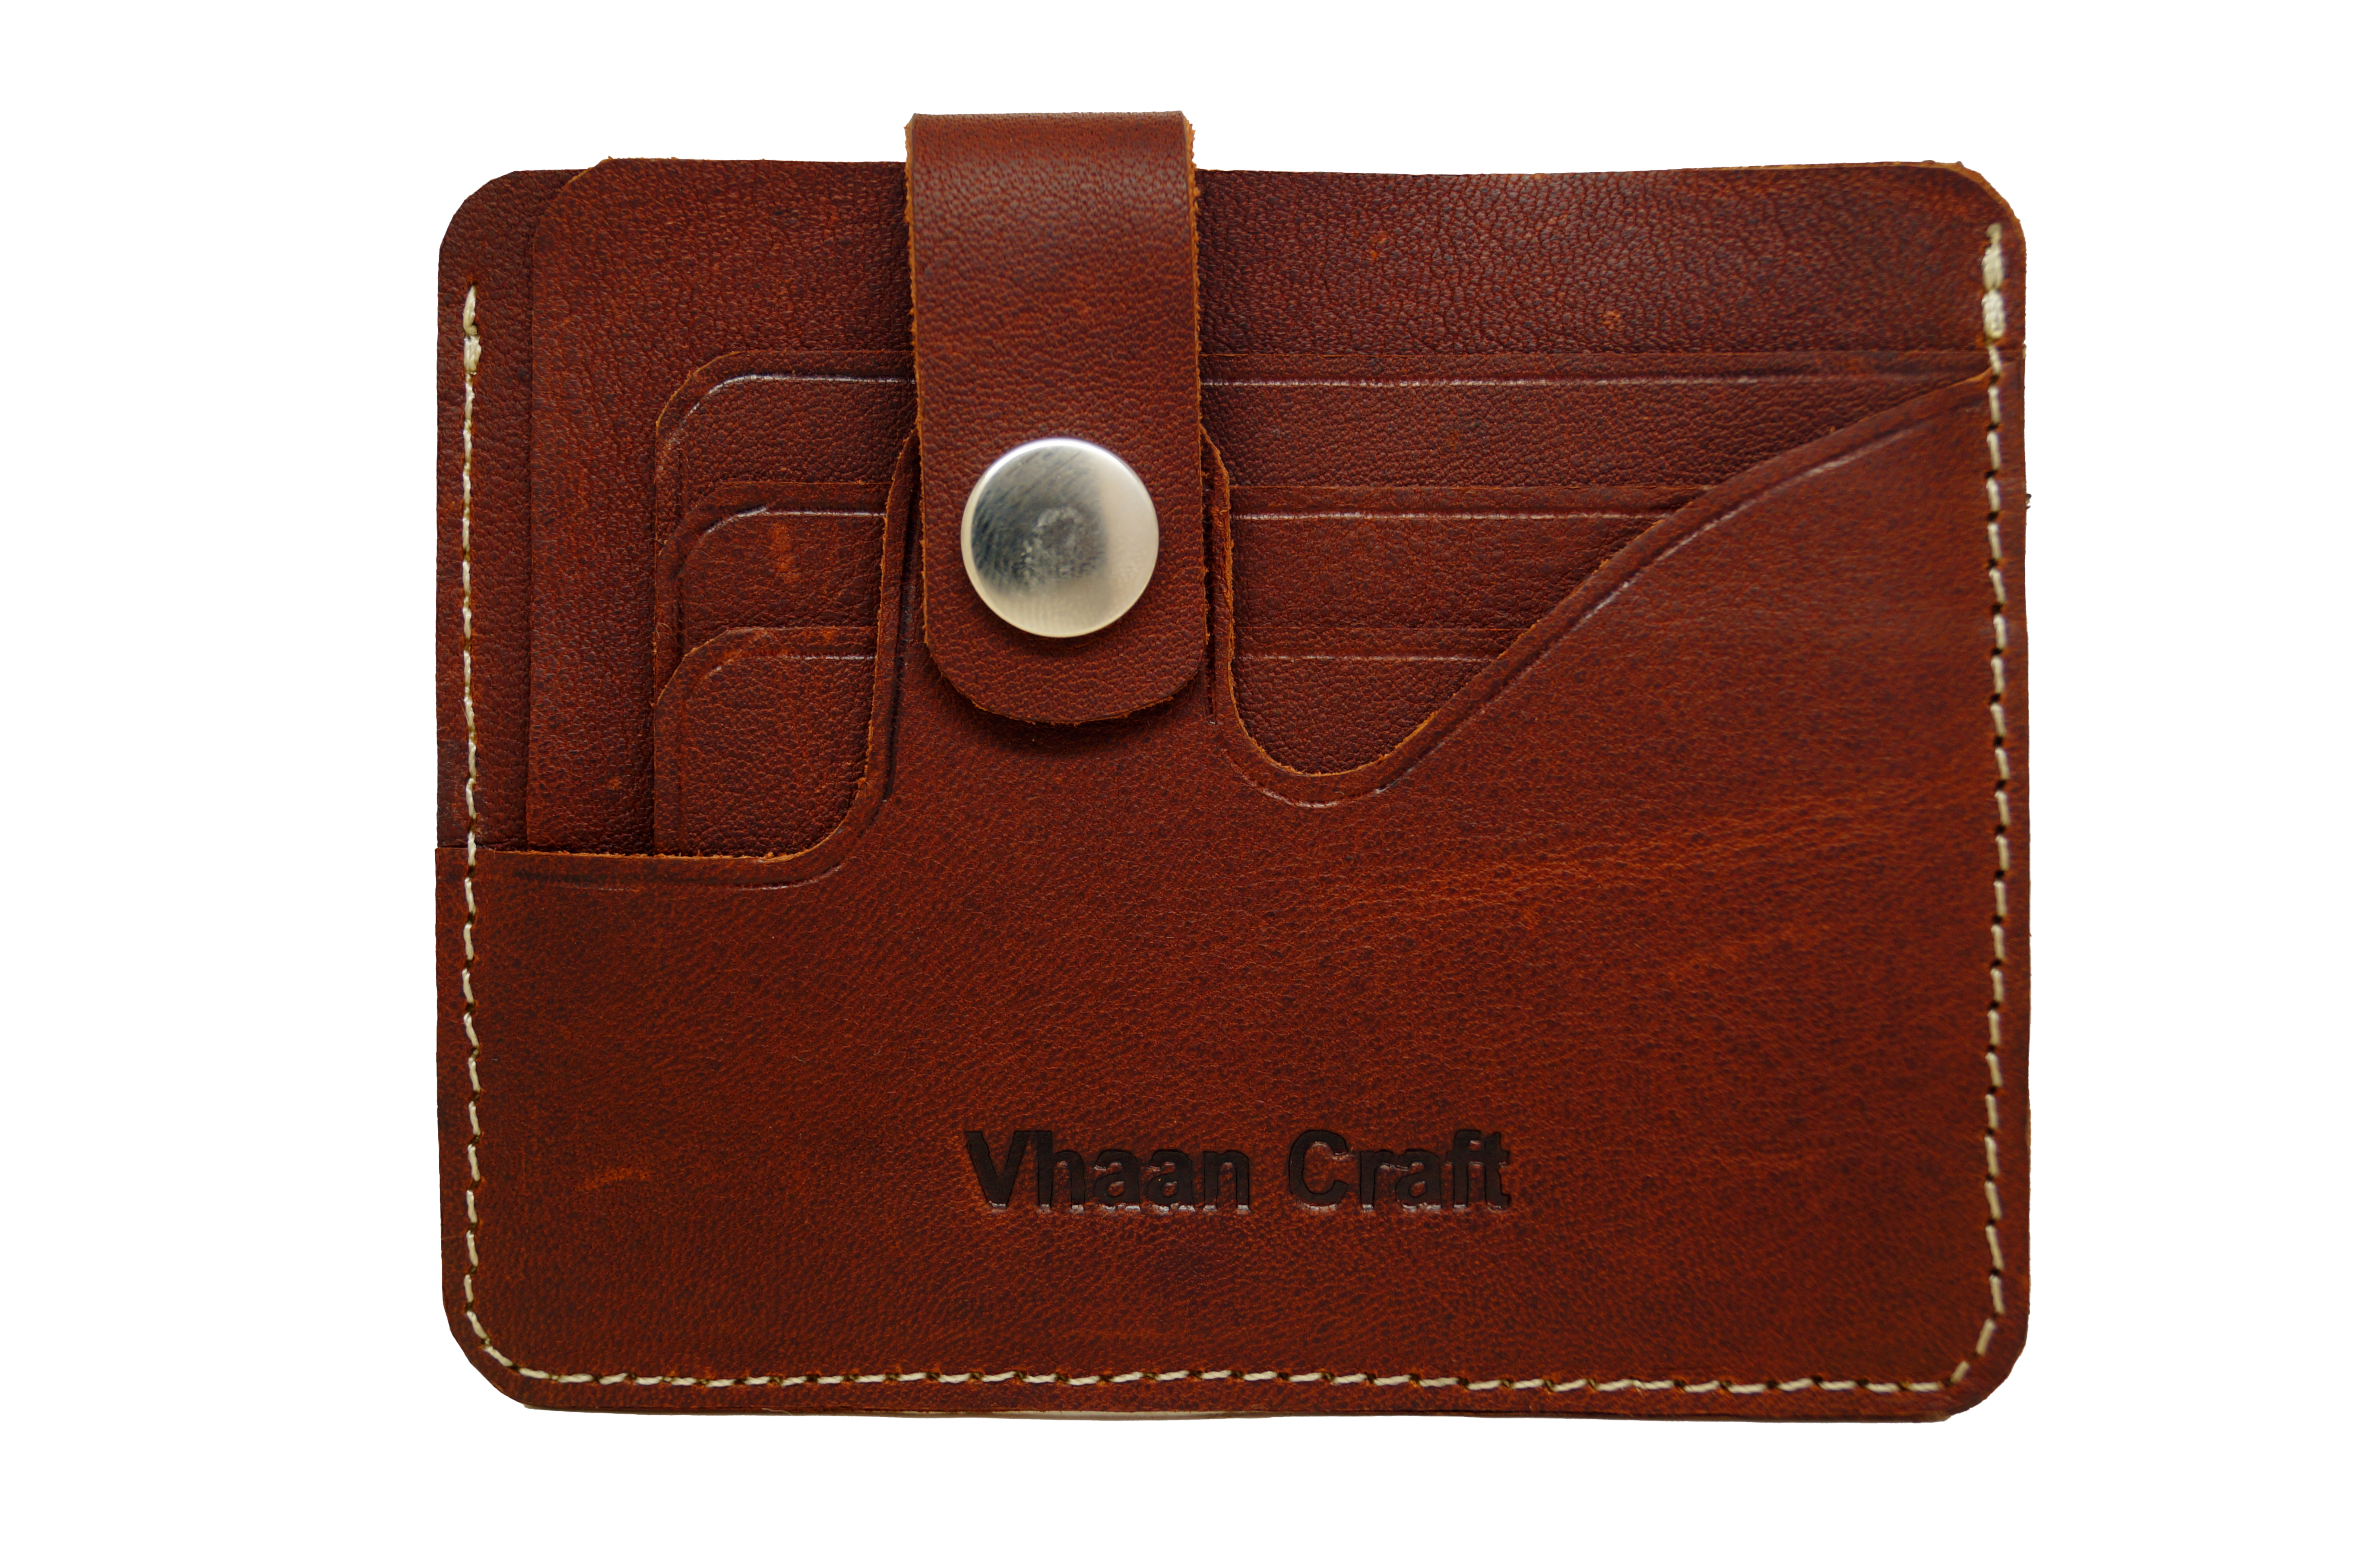 Vhaan's Heritage Oil Pulled Up Leather Card Holder - Maroon shade